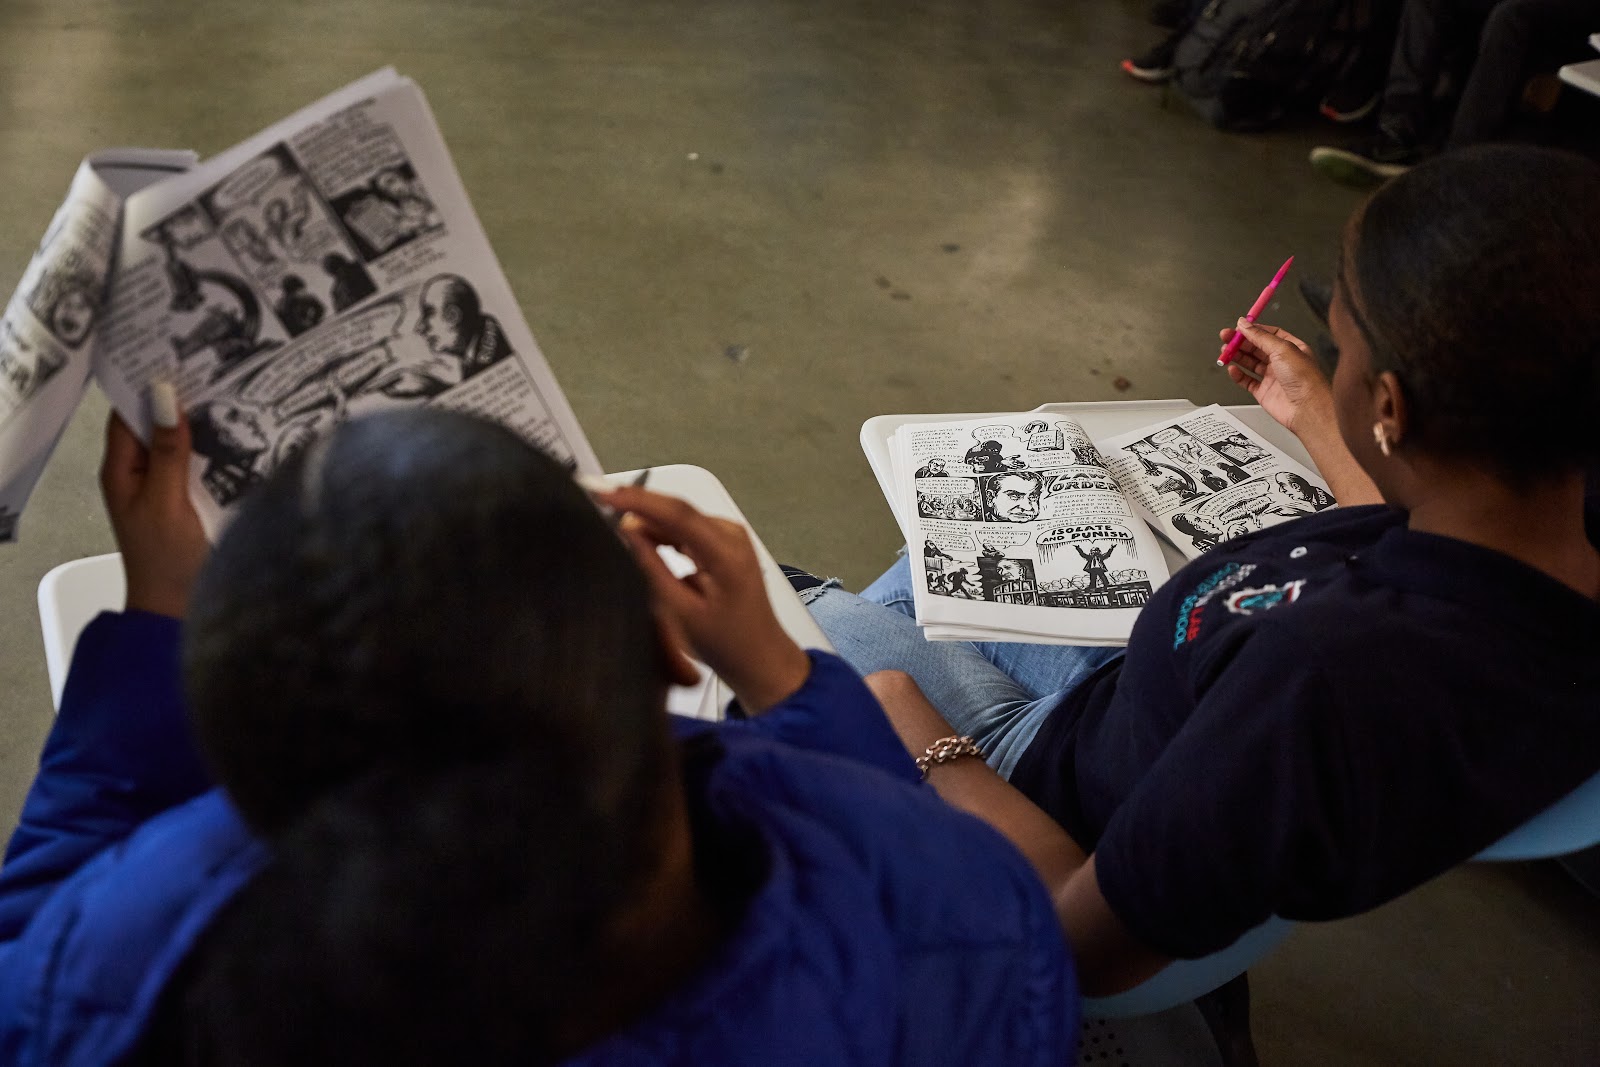 Two students reading a graphic novel text take notes together in a classroom